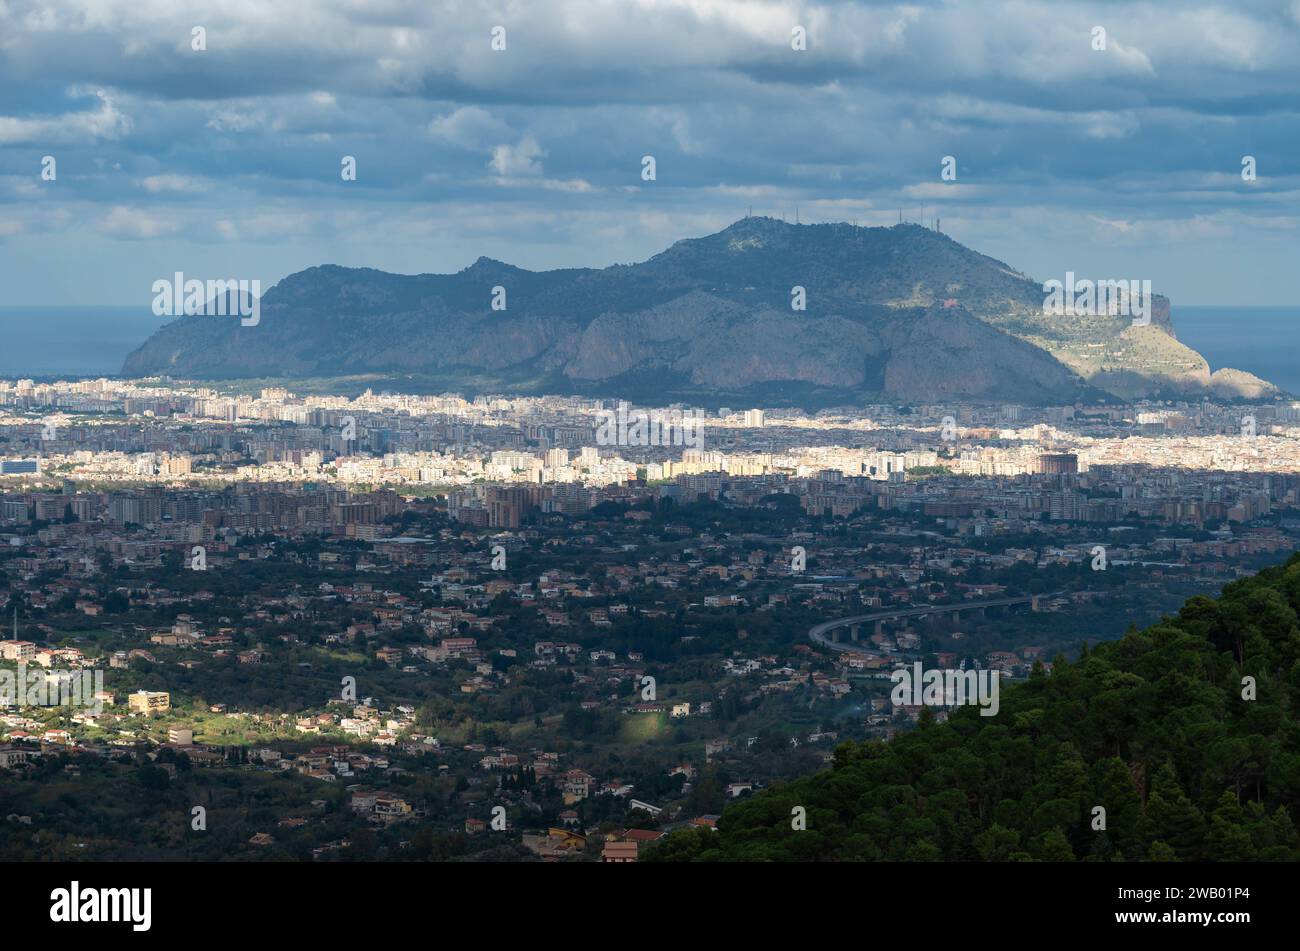 Panoramic view over the city of Palermo and the surrounding nature and mountains Palermo, Sicily, Italy Stock Photo